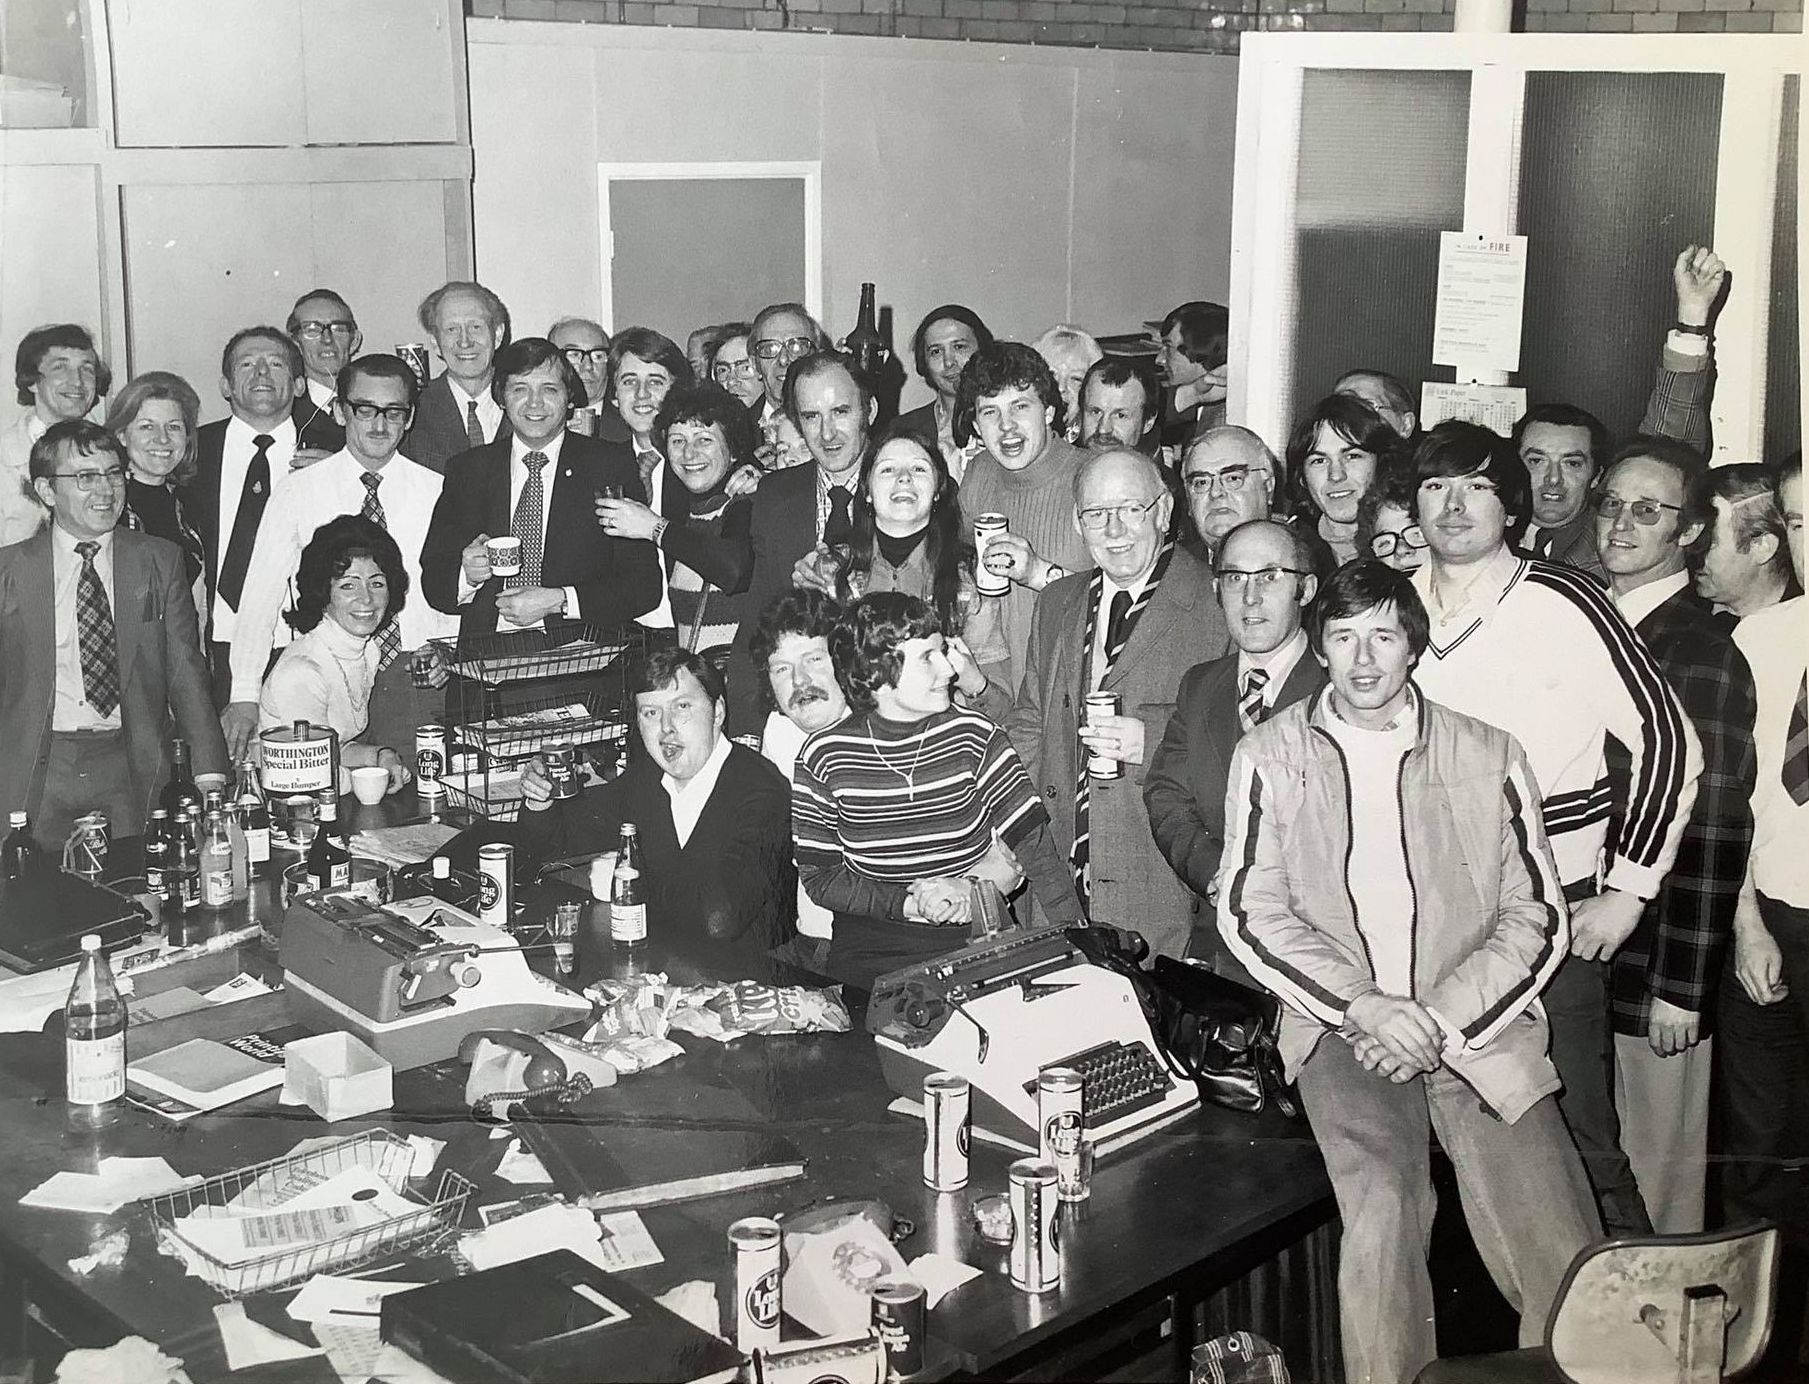 Southport Visiter staff celebrate the launch of the new free newspaper called Grapevine, which was later renamed the Midweek Visiter. Date unknown. Photo by Graham Bridge